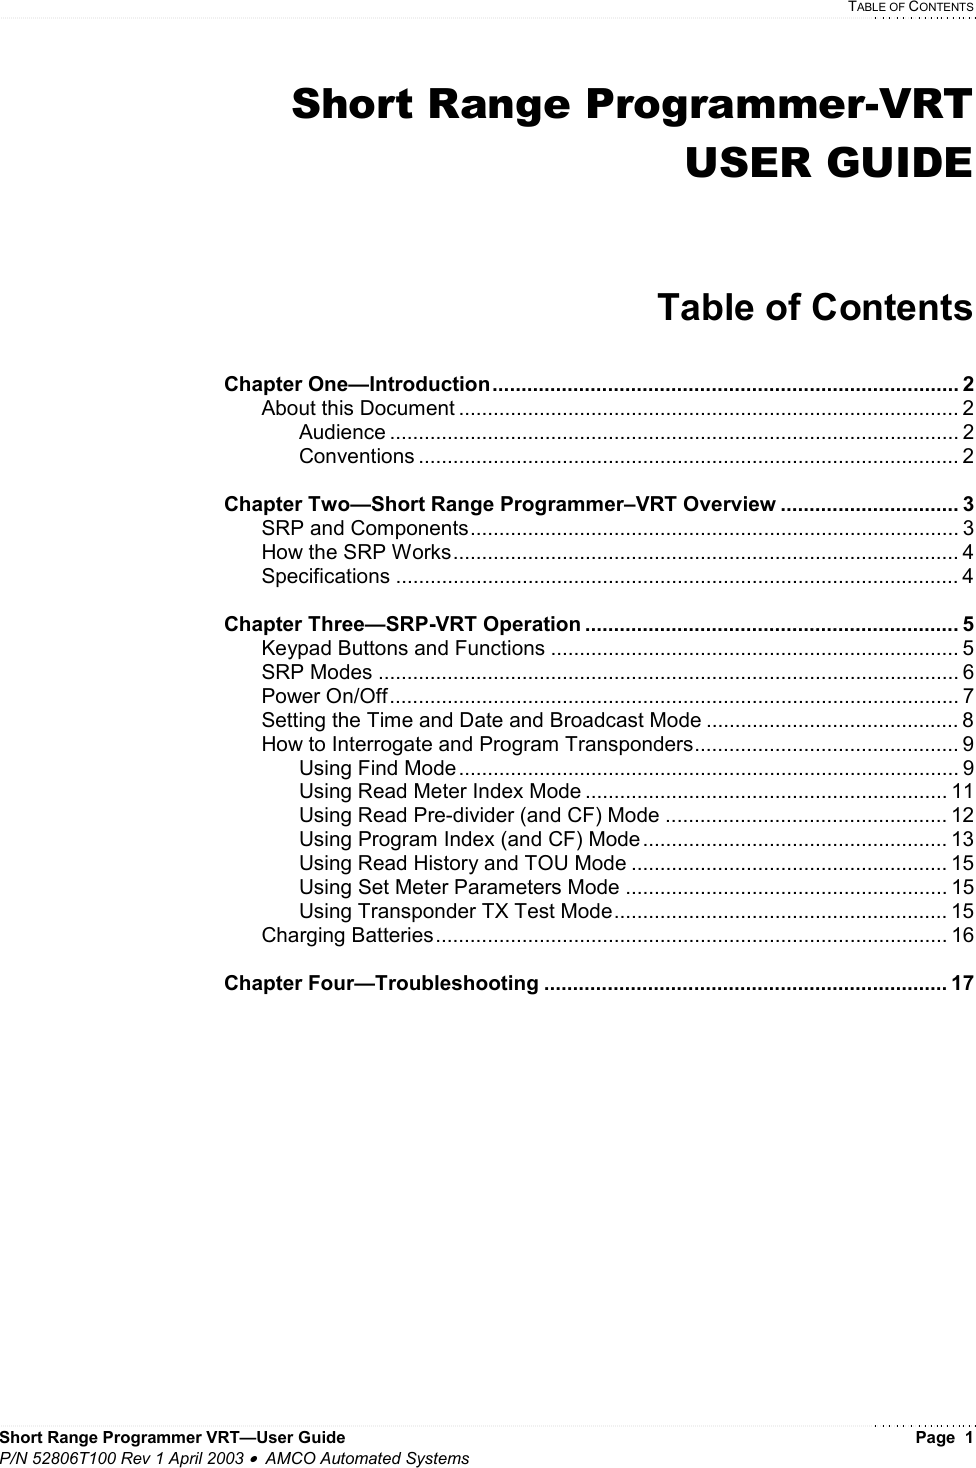   TABLE OF CONTENTS Short Range Programmer VRT—User Guide    Page  1 P/N 52806T100 Rev 1 April 2003 •  AMCO Automated Systems Short Range Programmer-VRT USER GUIDE   Table of Contents  Chapter One—Introduction................................................................................. 2   About this Document ....................................................................................... 2   Audience ................................................................................................... 2   Conventions .............................................................................................. 2  Chapter Two—Short Range Programmer–VRT Overview ............................... 3   SRP and Components..................................................................................... 3   How the SRP Works........................................................................................ 4  Specifications .................................................................................................. 4  Chapter Three—SRP-VRT Operation ................................................................. 5   Keypad Buttons and Functions ....................................................................... 5  SRP Modes ..................................................................................................... 6  Power On/Off................................................................................................... 7   Setting the Time and Date and Broadcast Mode ............................................ 8   How to Interrogate and Program Transponders.............................................. 9   Using Find Mode ....................................................................................... 9     Using Read Meter Index Mode ............................................................... 11     Using Read Pre-divider (and CF) Mode ................................................. 12     Using Program Index (and CF) Mode ..................................................... 13     Using Read History and TOU Mode ....................................................... 15   Using Set Meter Parameters Mode ........................................................ 15     Using Transponder TX Test Mode.......................................................... 15  Charging Batteries......................................................................................... 16  Chapter Four—Troubleshooting ...................................................................... 17            